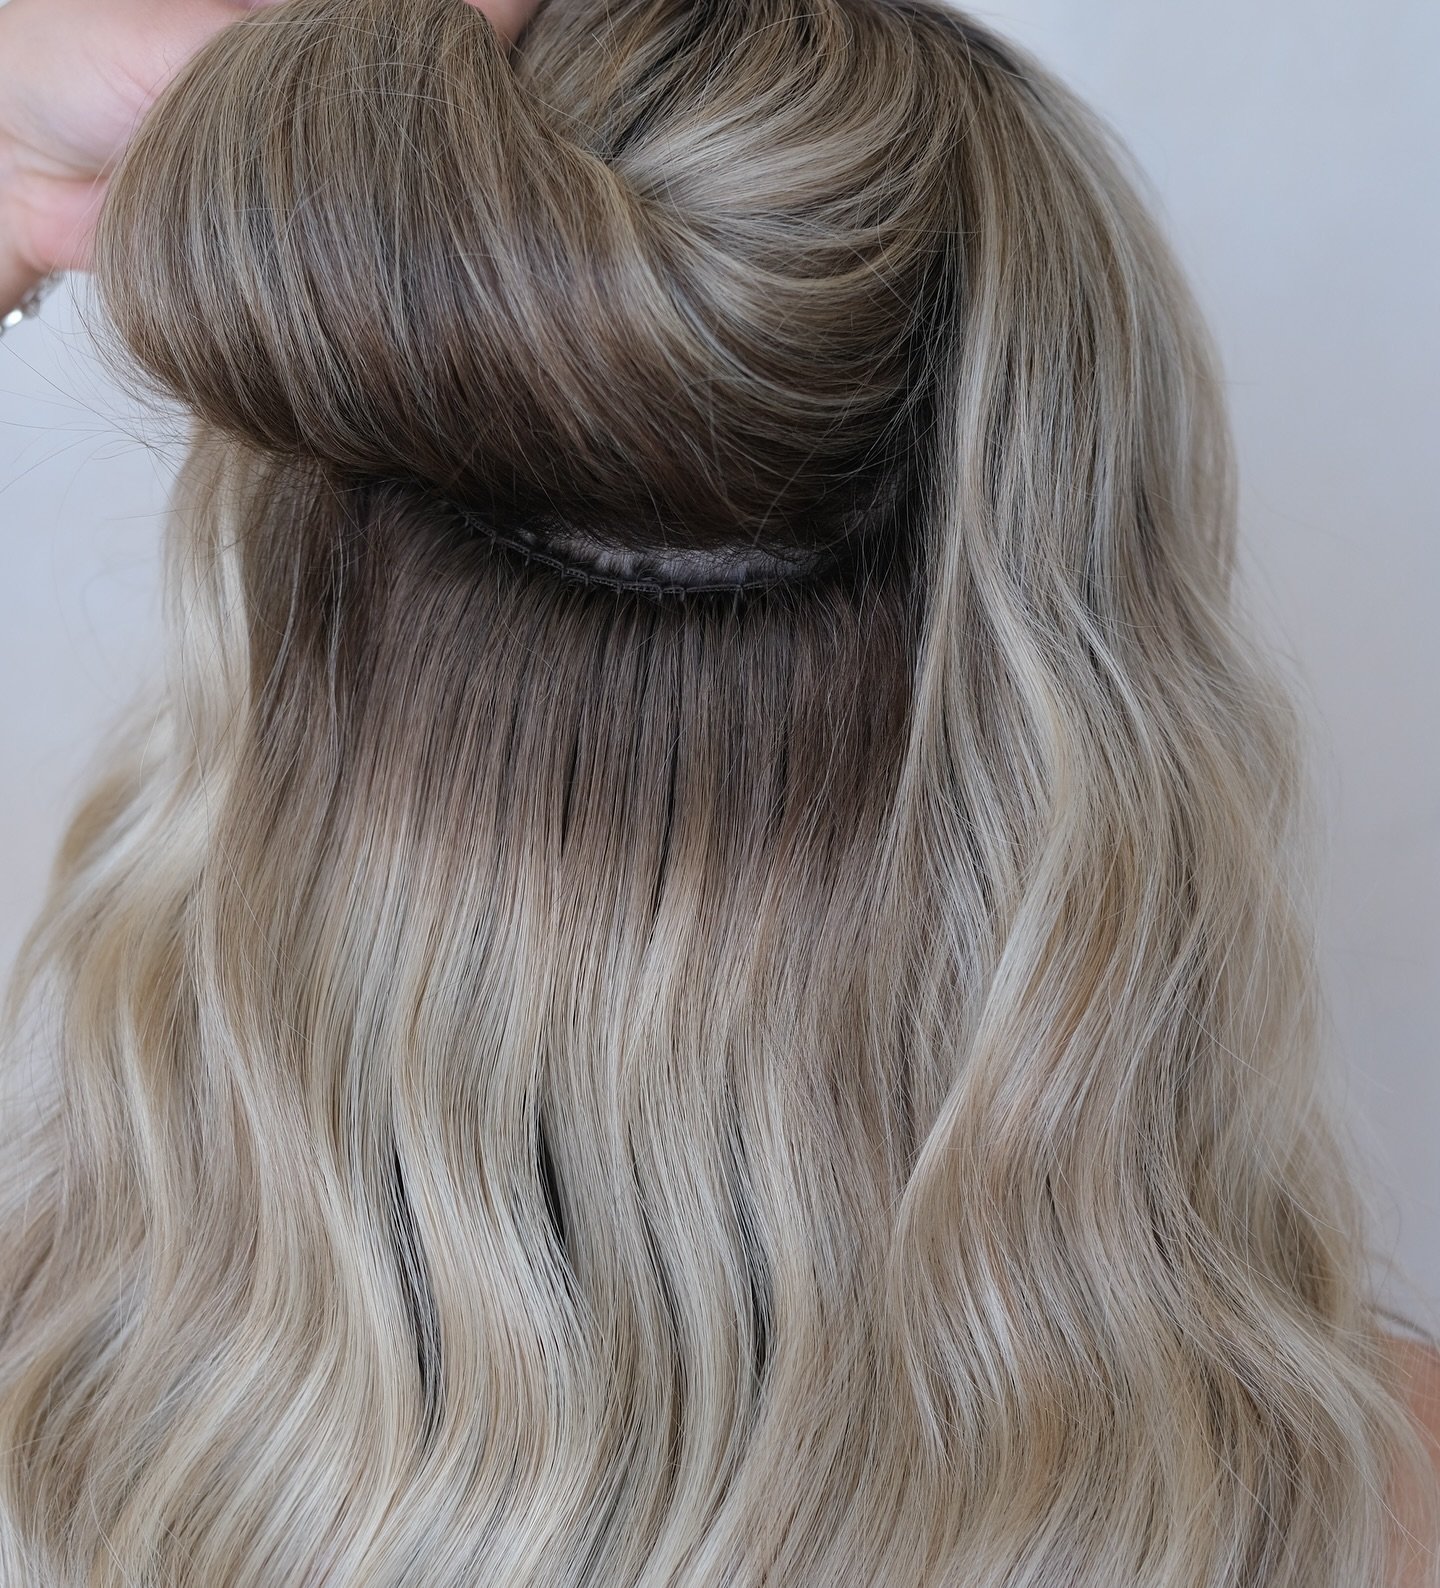 🌟 MUSE&rsquo;S SEAMLESS SEAMS🌟
&bull;
Say goodbye to visible hair extension seams! Our Seamless Seams create flawless and undetectable hair extensions. Get voluminous, natural-looking locks without any visible traces of extensions. Our amazing arti